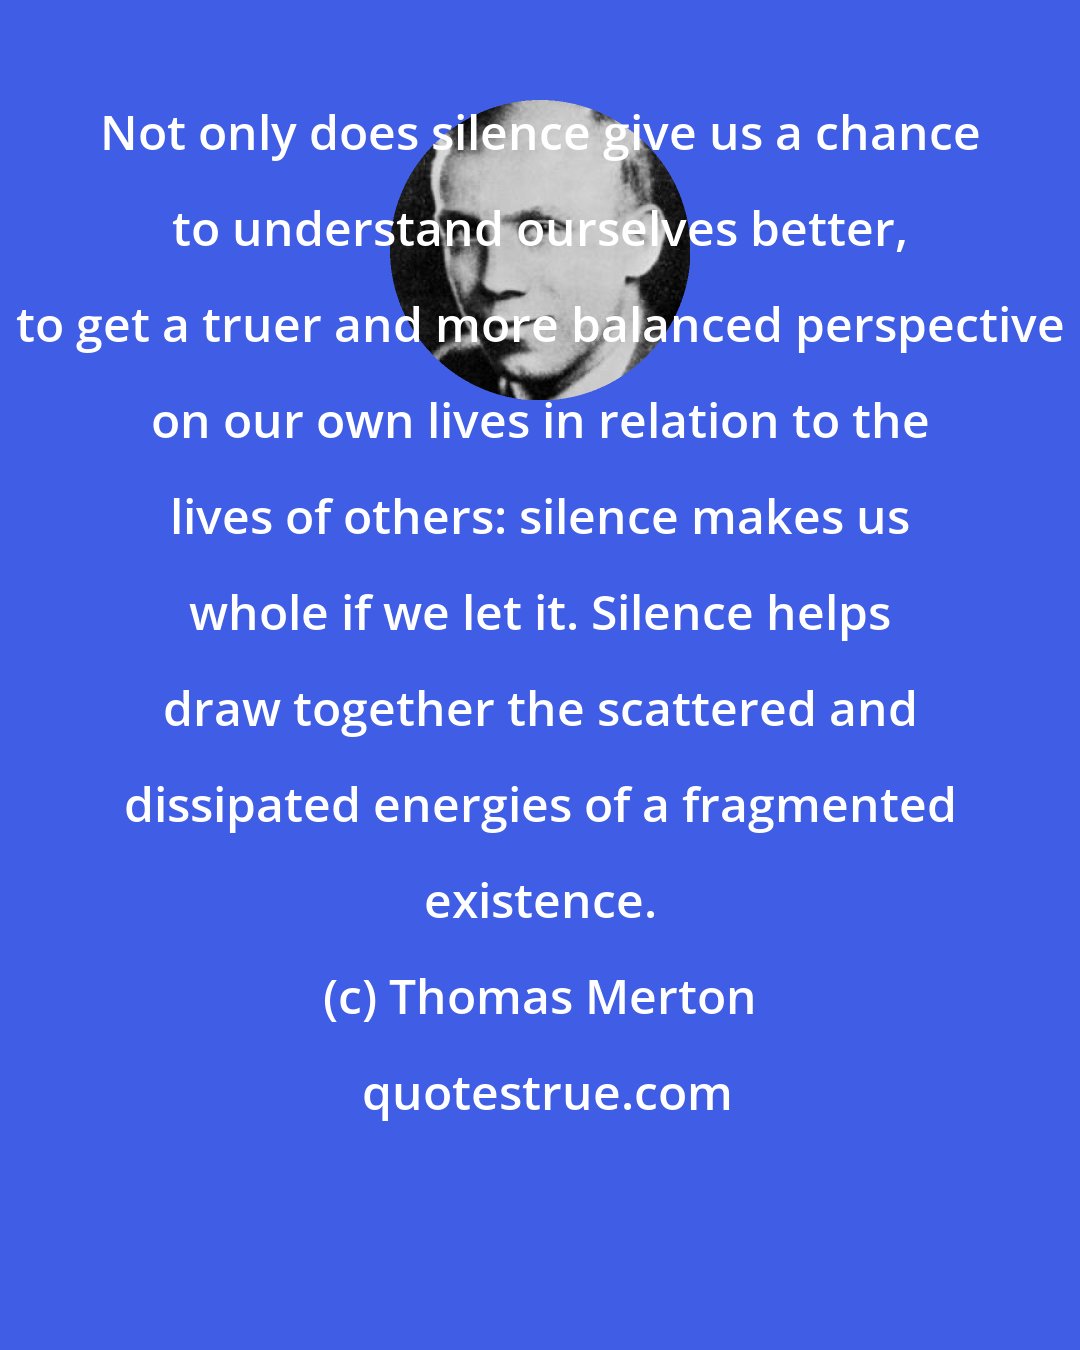 Thomas Merton: Not only does silence give us a chance to understand ourselves better, to get a truer and more balanced perspective on our own lives in relation to the lives of others: silence makes us whole if we let it. Silence helps draw together the scattered and dissipated energies of a fragmented existence.